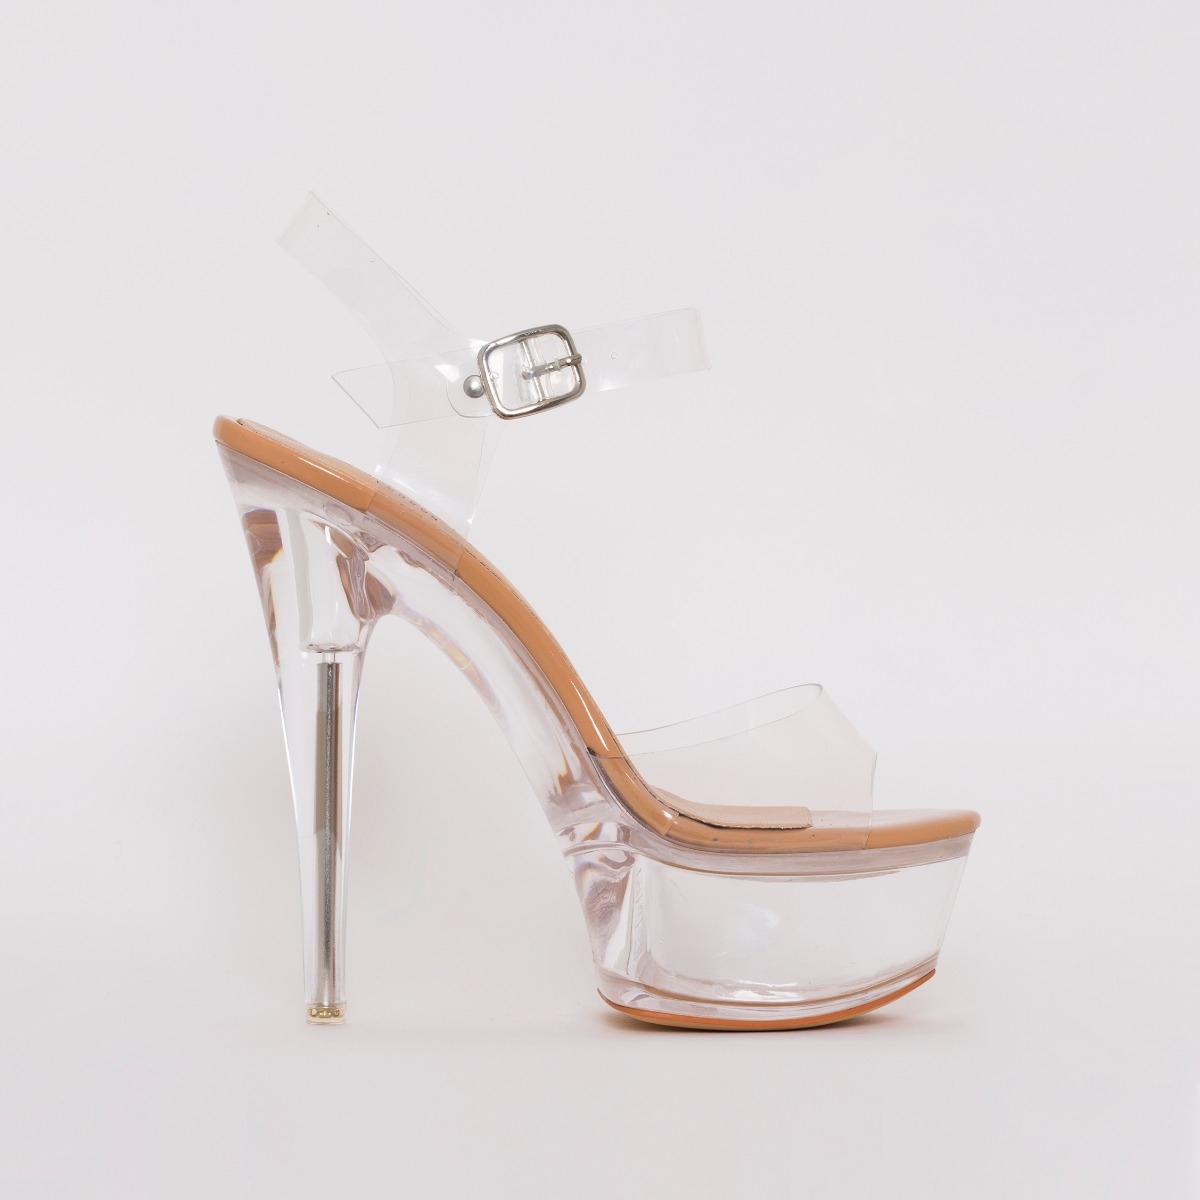 711-Jesse, 7 Inch Clear High-Heel with 2.75 Inch Platform Shoes